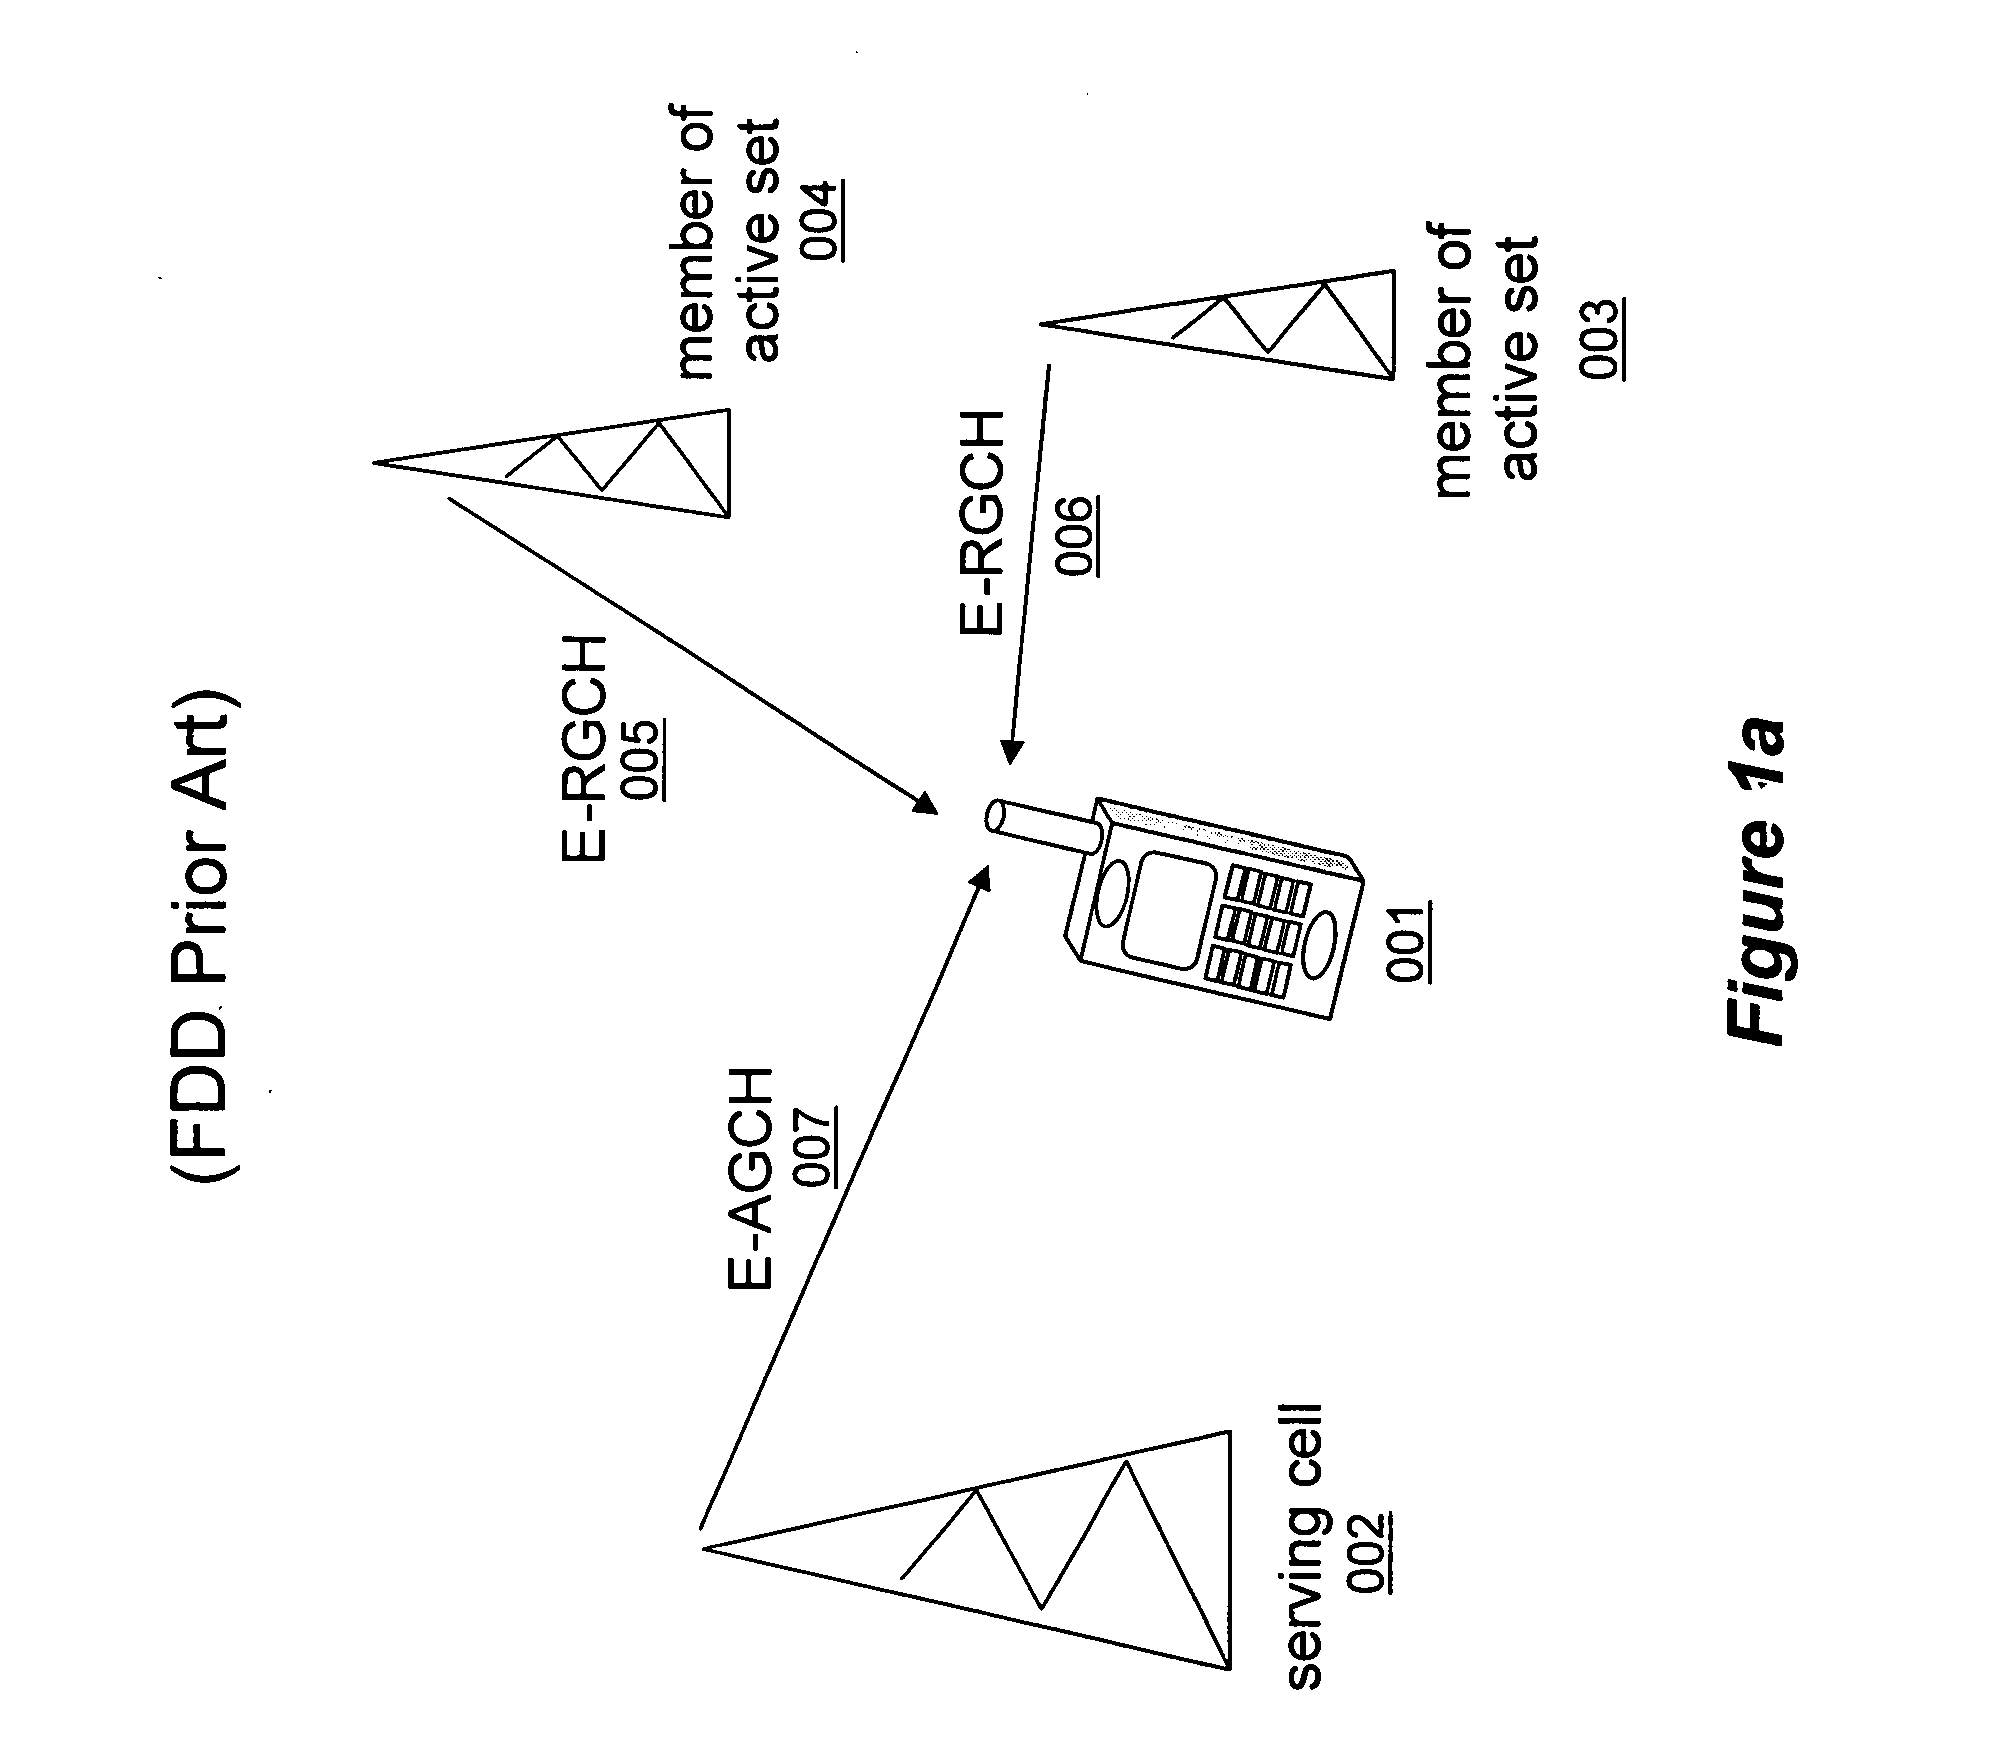 Uplink resource allocation to control intercell interference in a wireless communication system